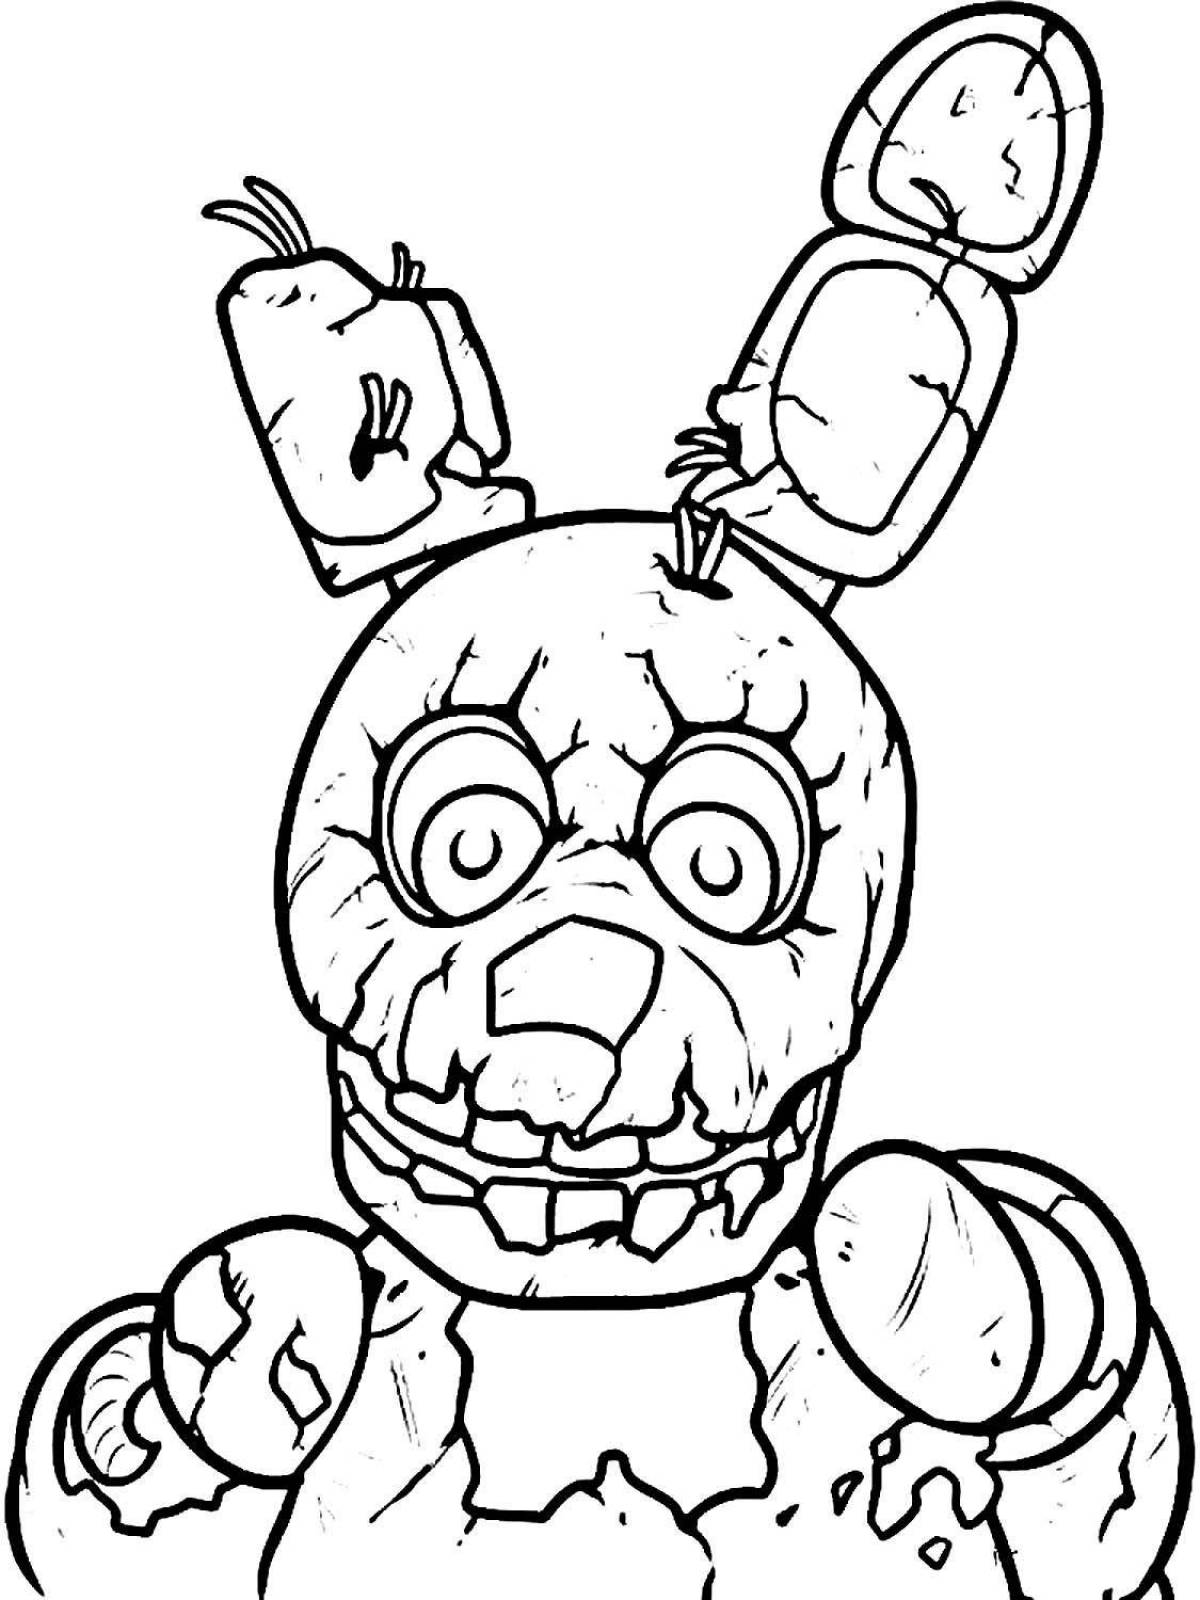 Coloring book exciting freddy bear